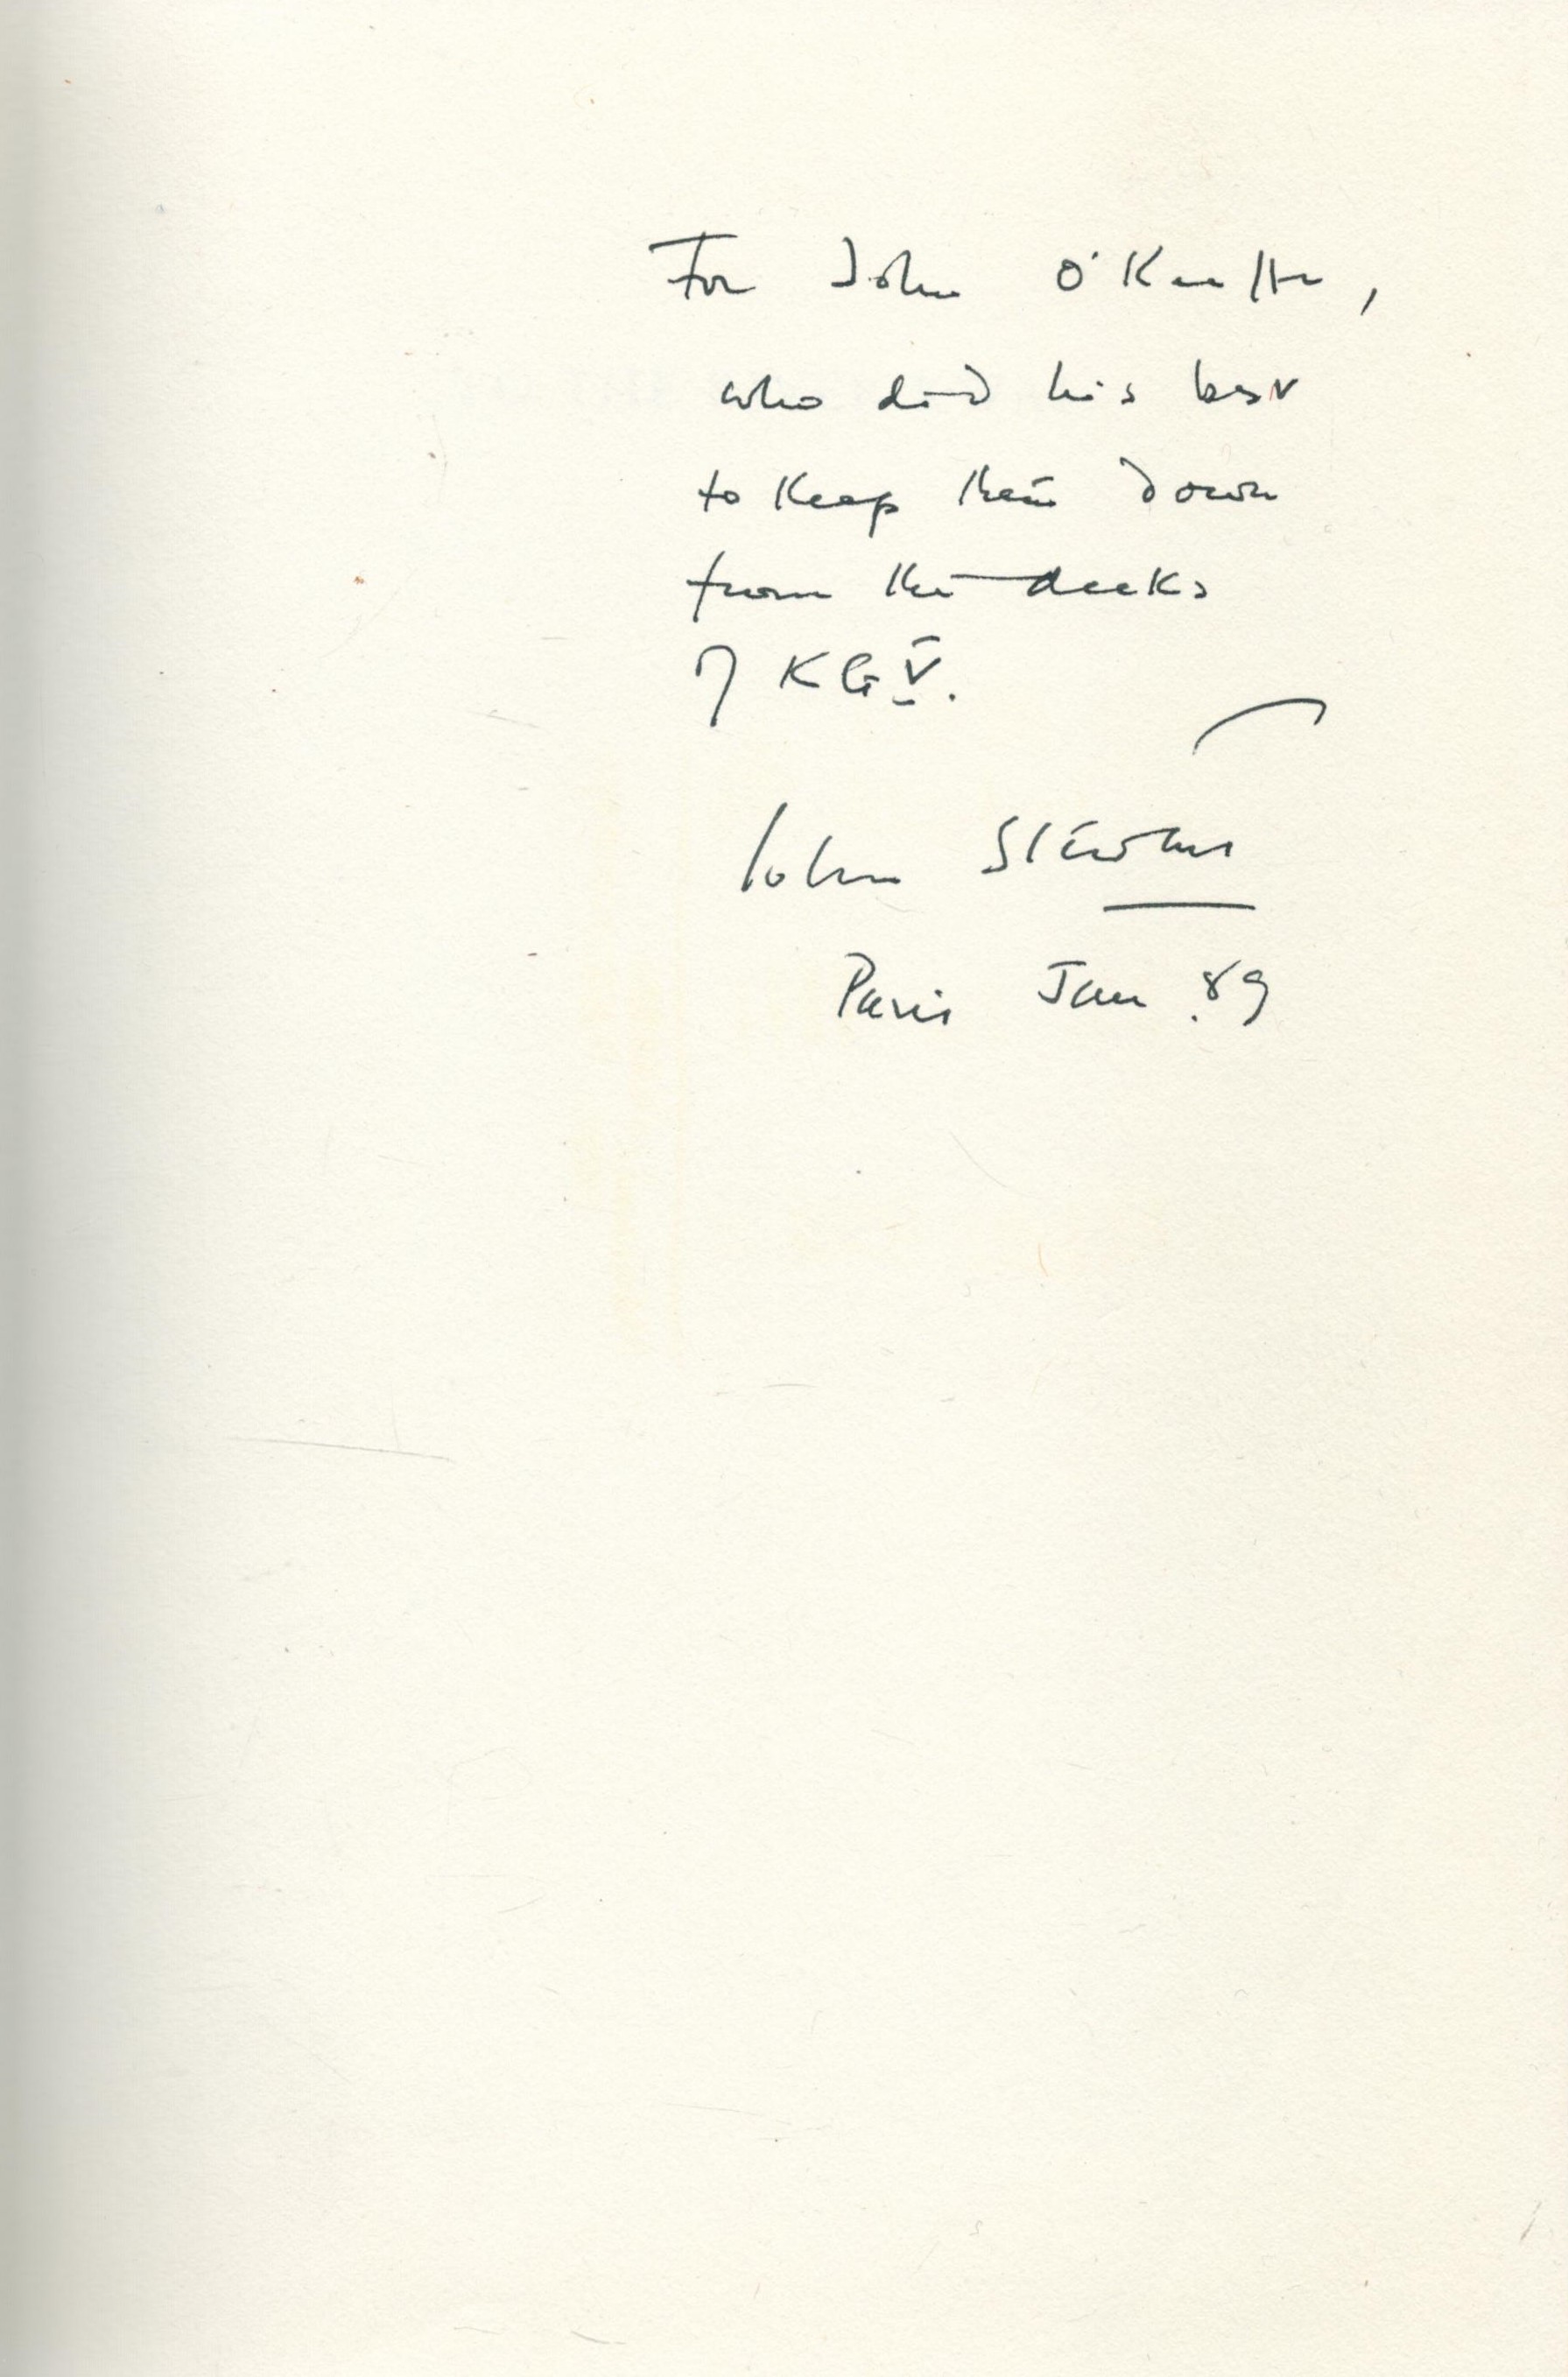 John Stewart Signed Book To The River Kwai Two Journeys 1943, 1979, 1988 First Edition Hardback Book - Image 2 of 4